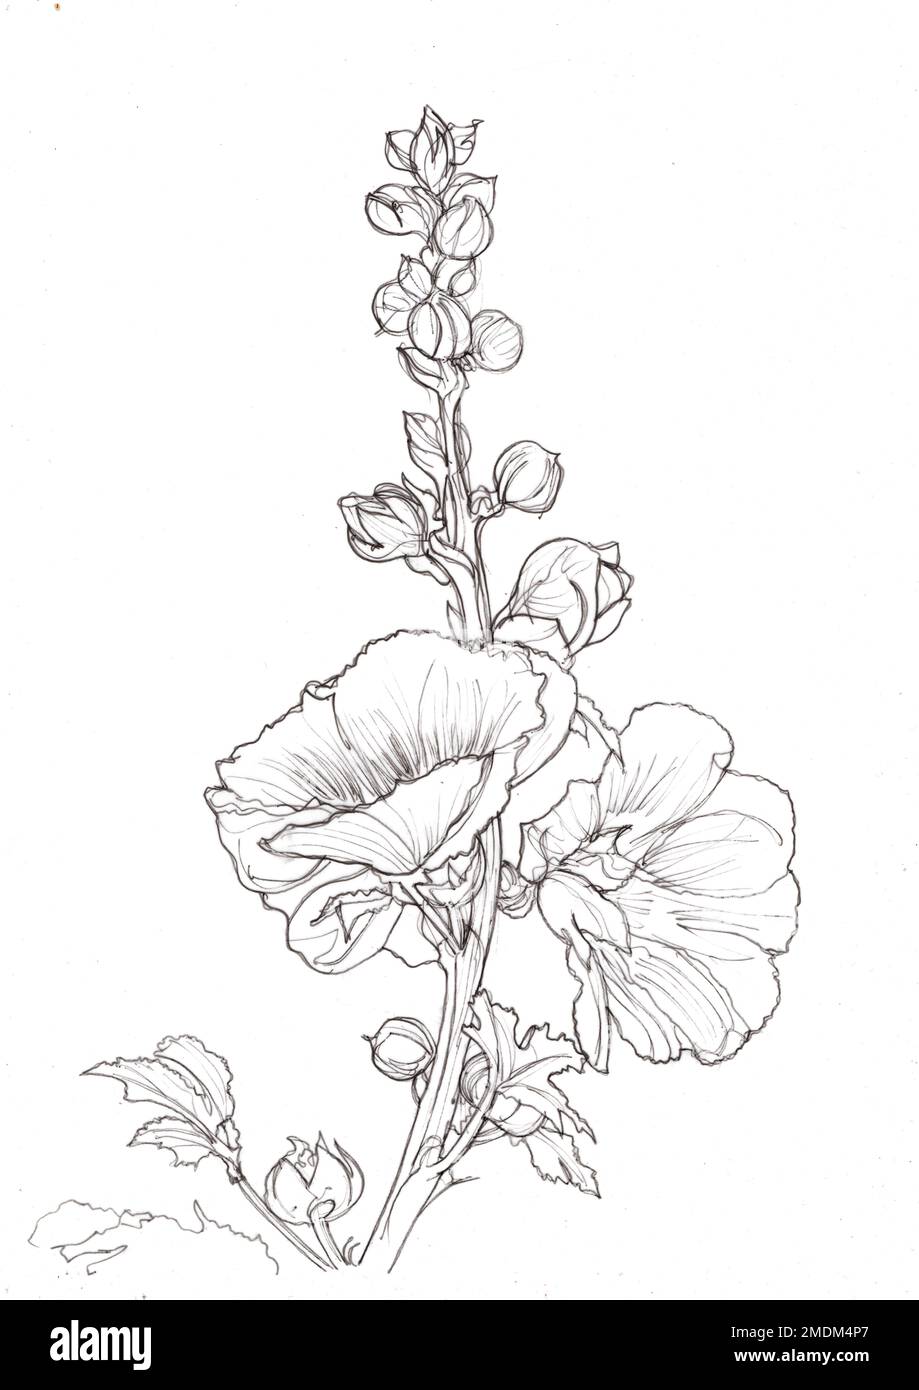 Black and white pencil sketch of hollyhock flowers. Stock Photo